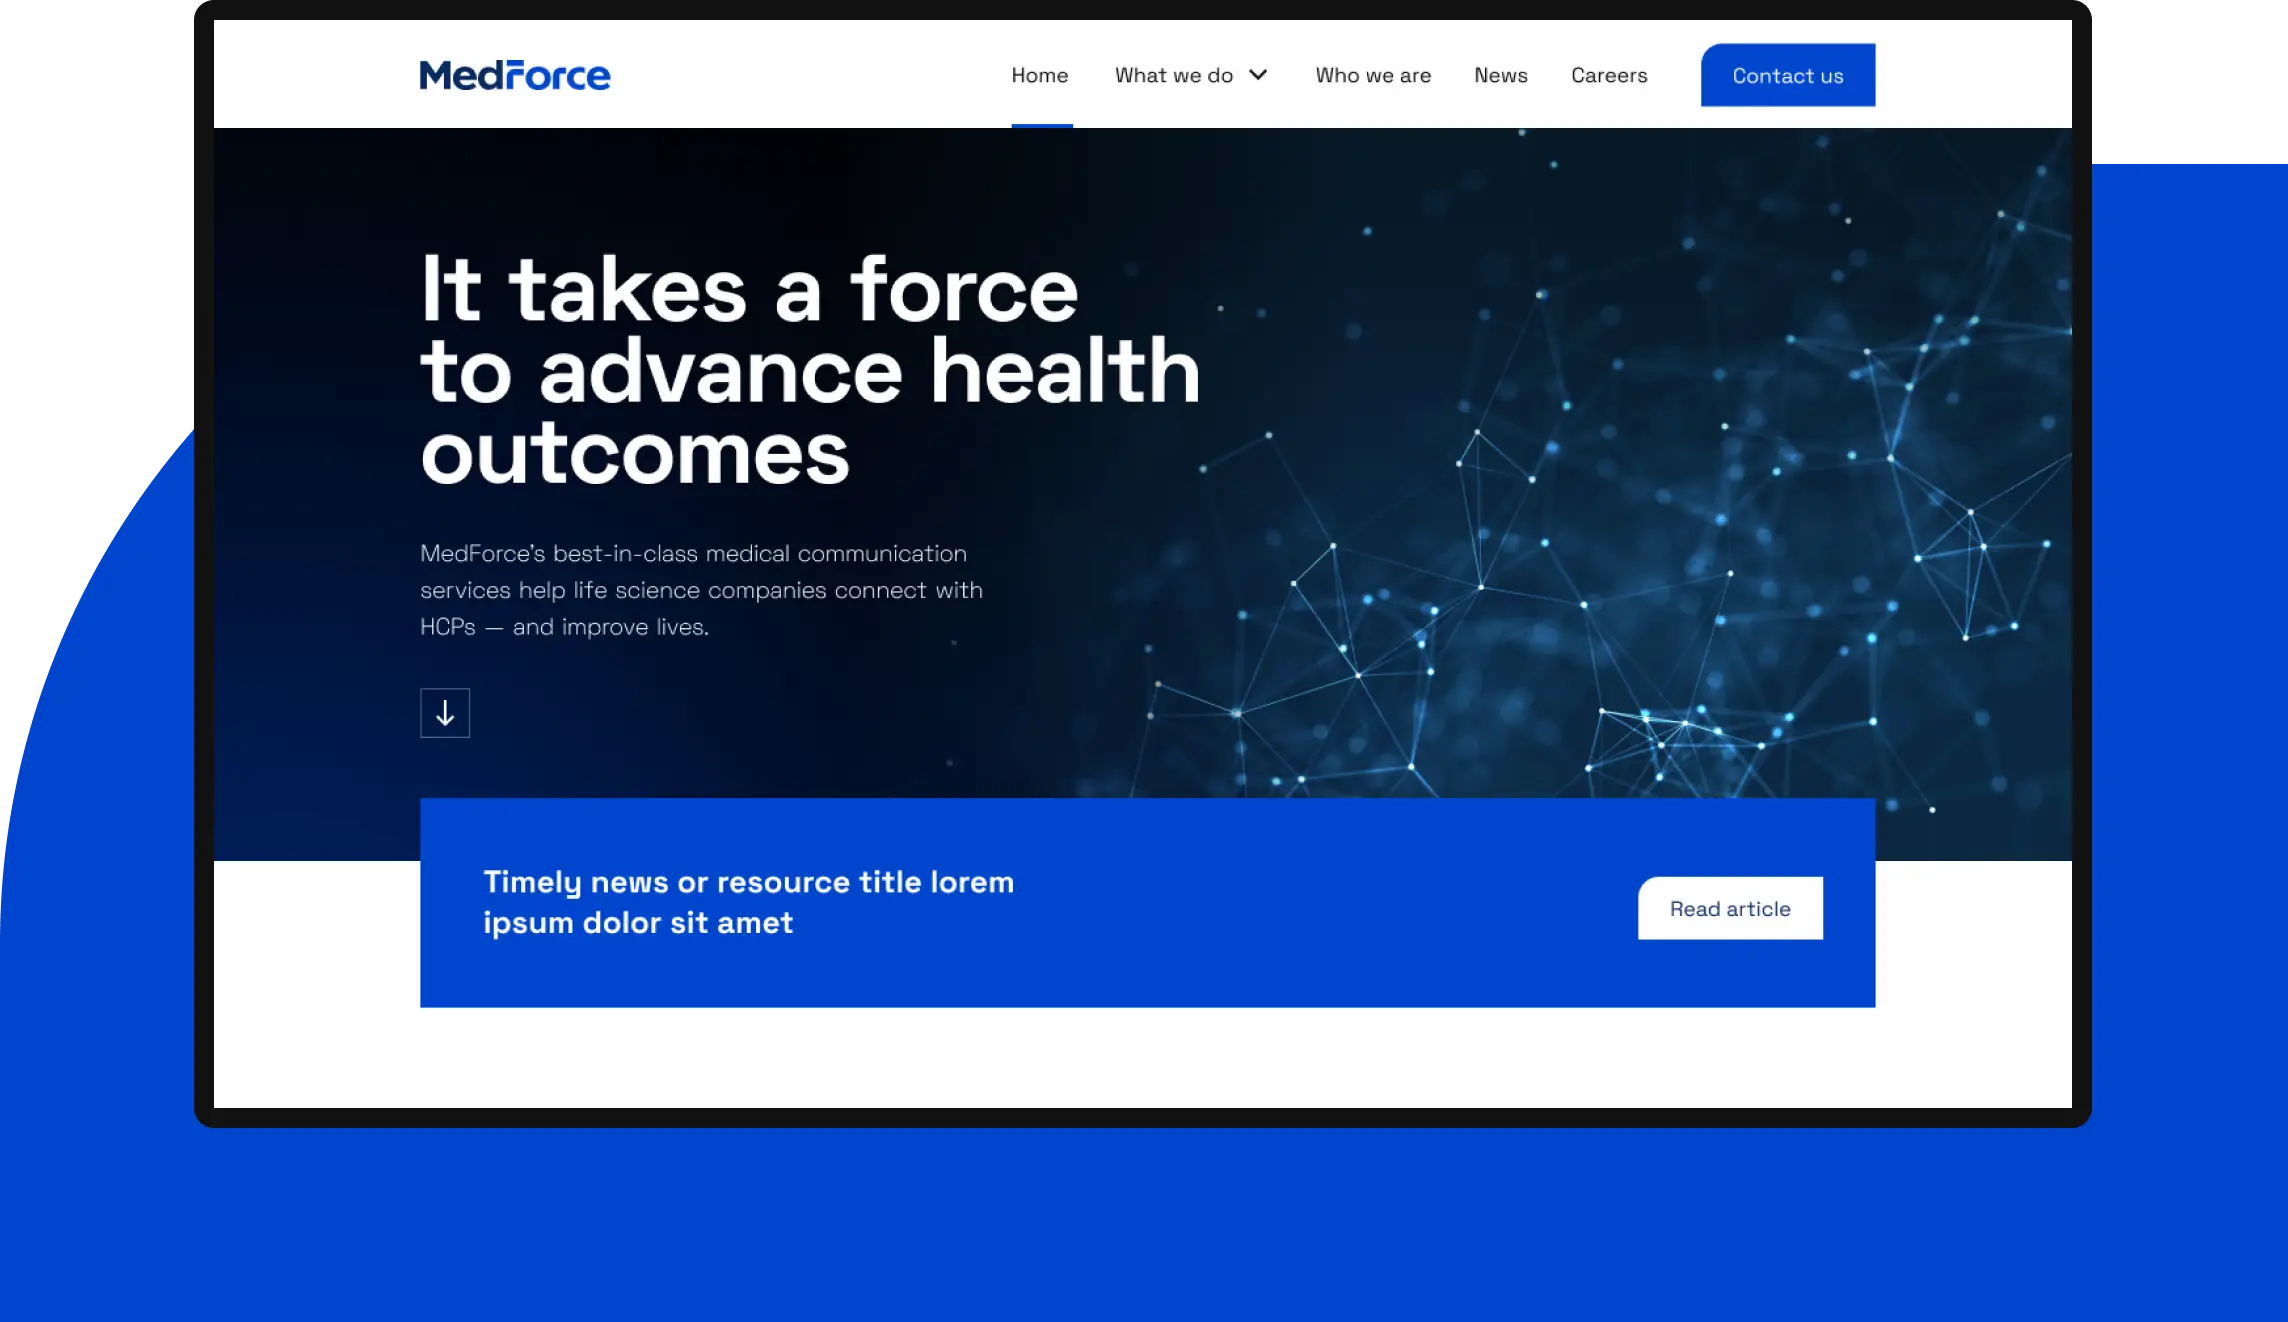 The Medforce home page, showing a dynamic animated hero graphic and marketing copy